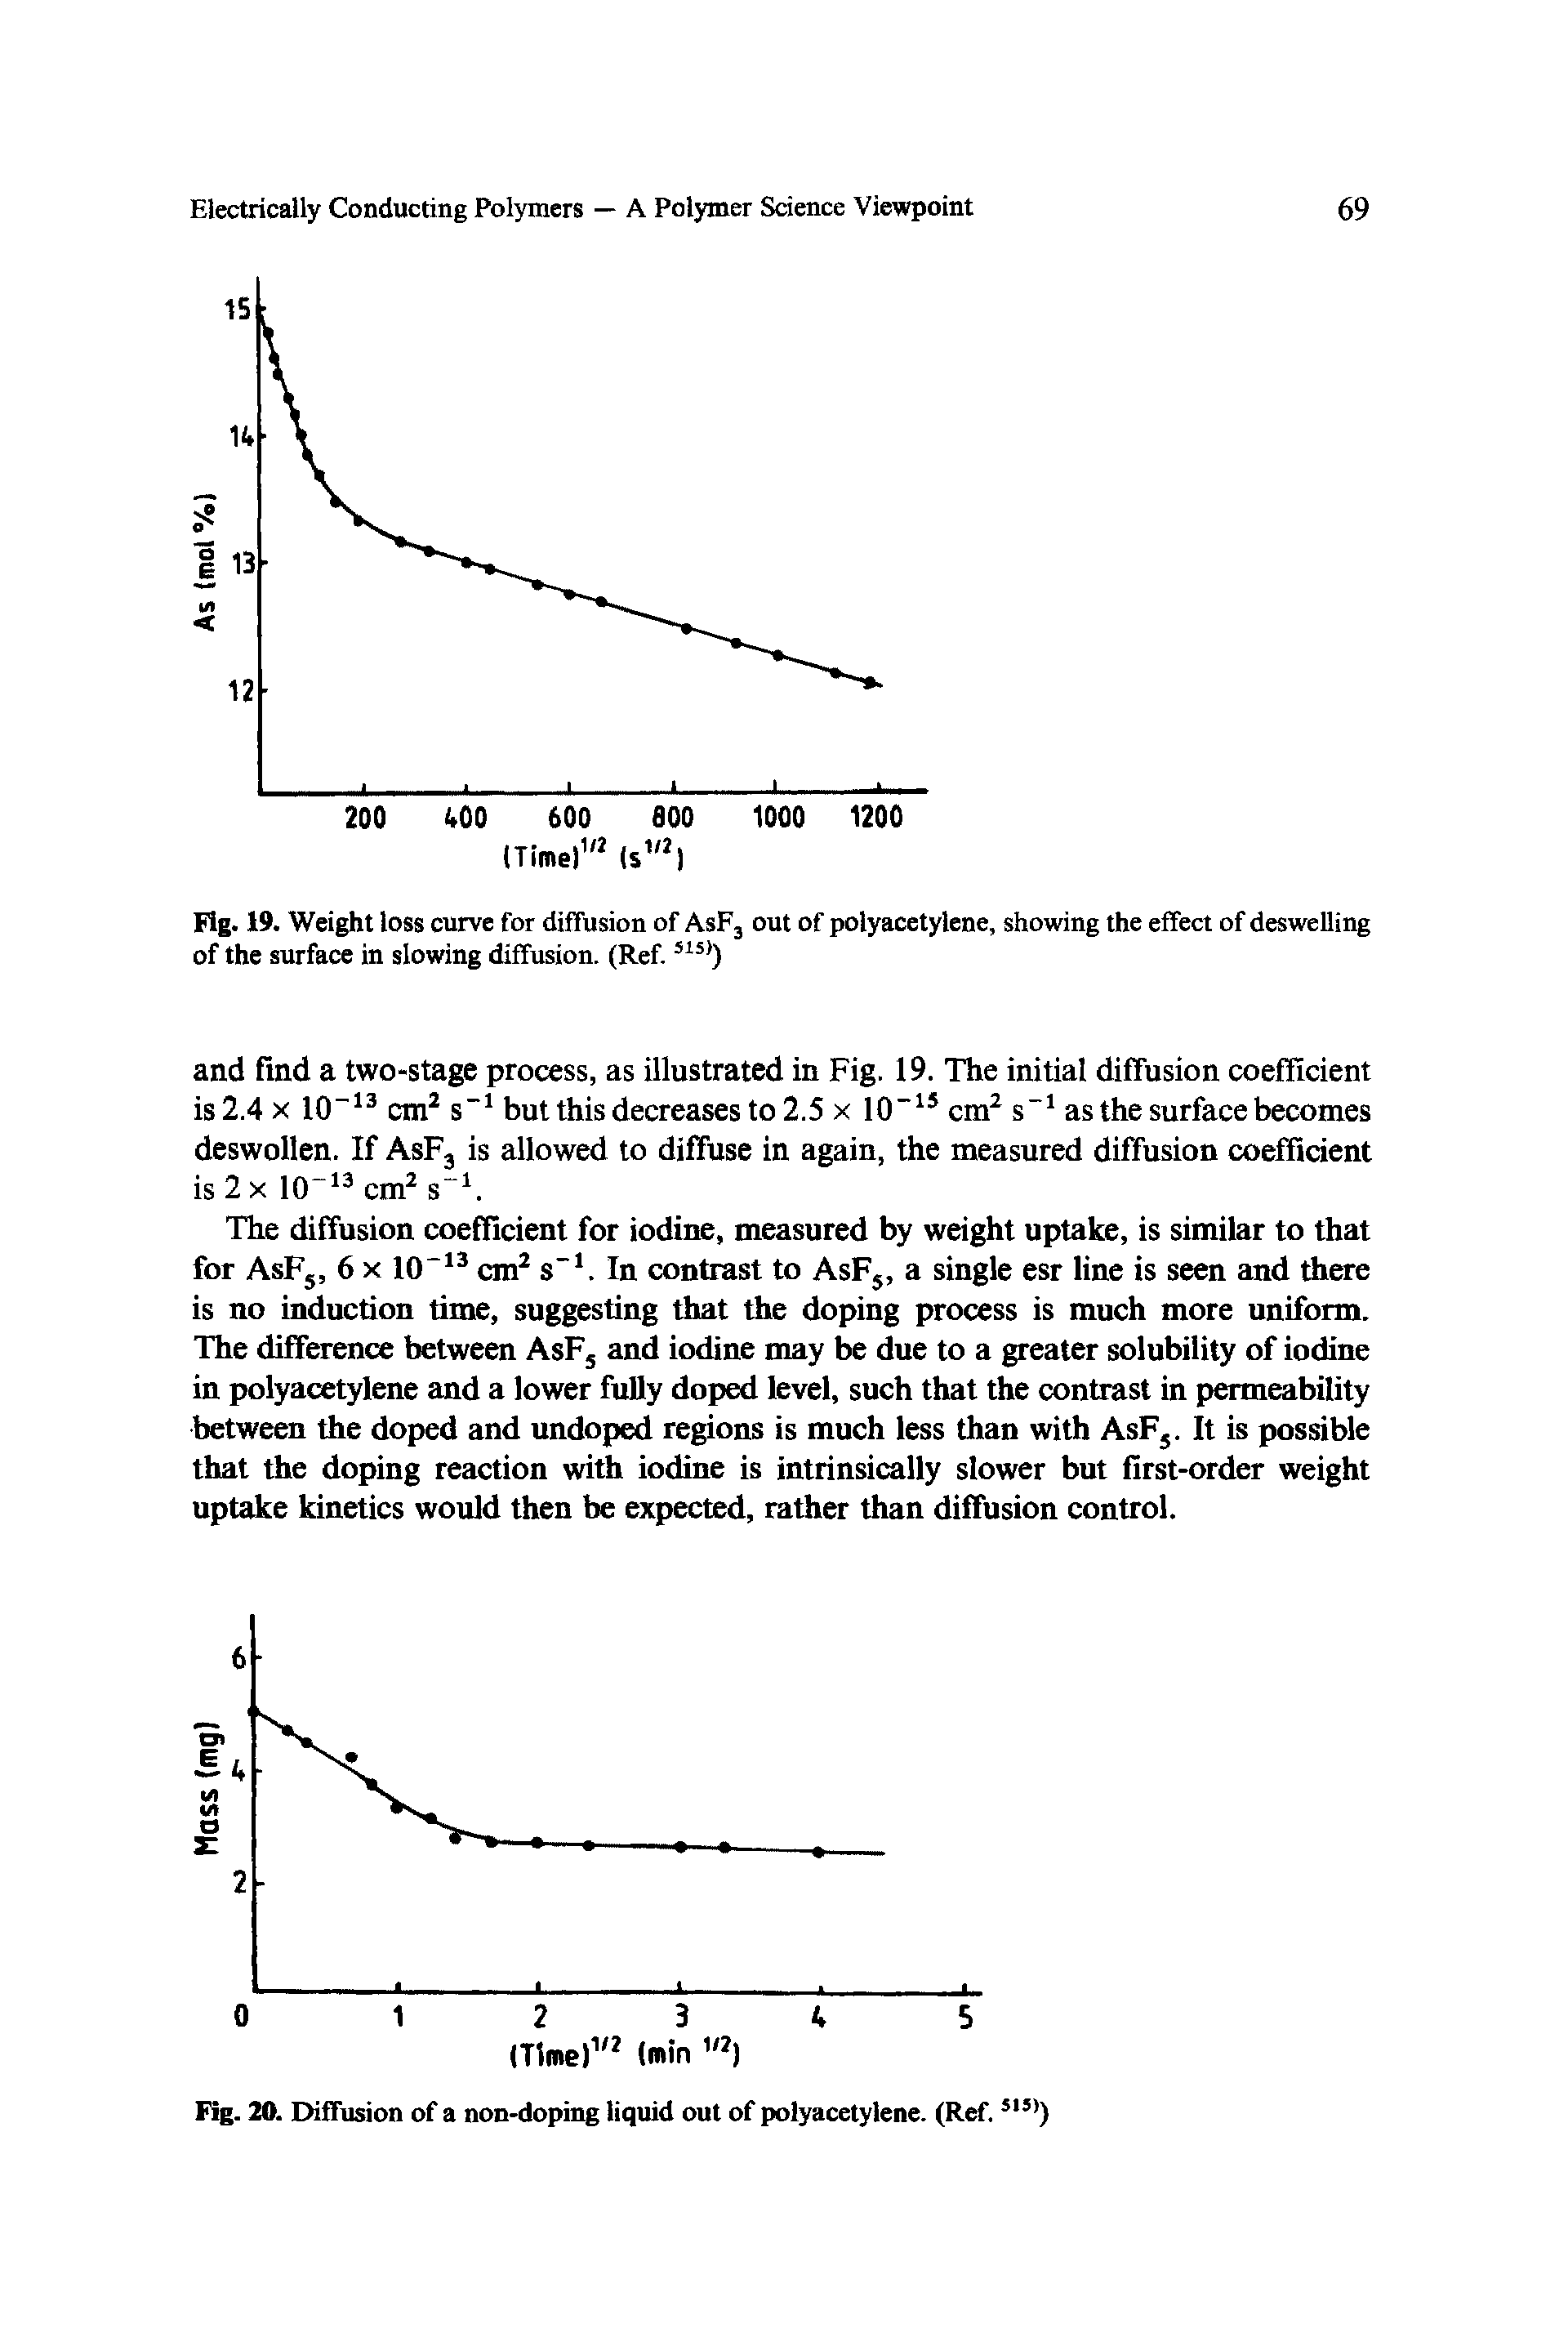 Fig. 19. Weight loss curve for diffusion of AsF3 out of polyacetylene, showing the effect of deswelling of the surface in slowing diffusion. (Ref.515>)...